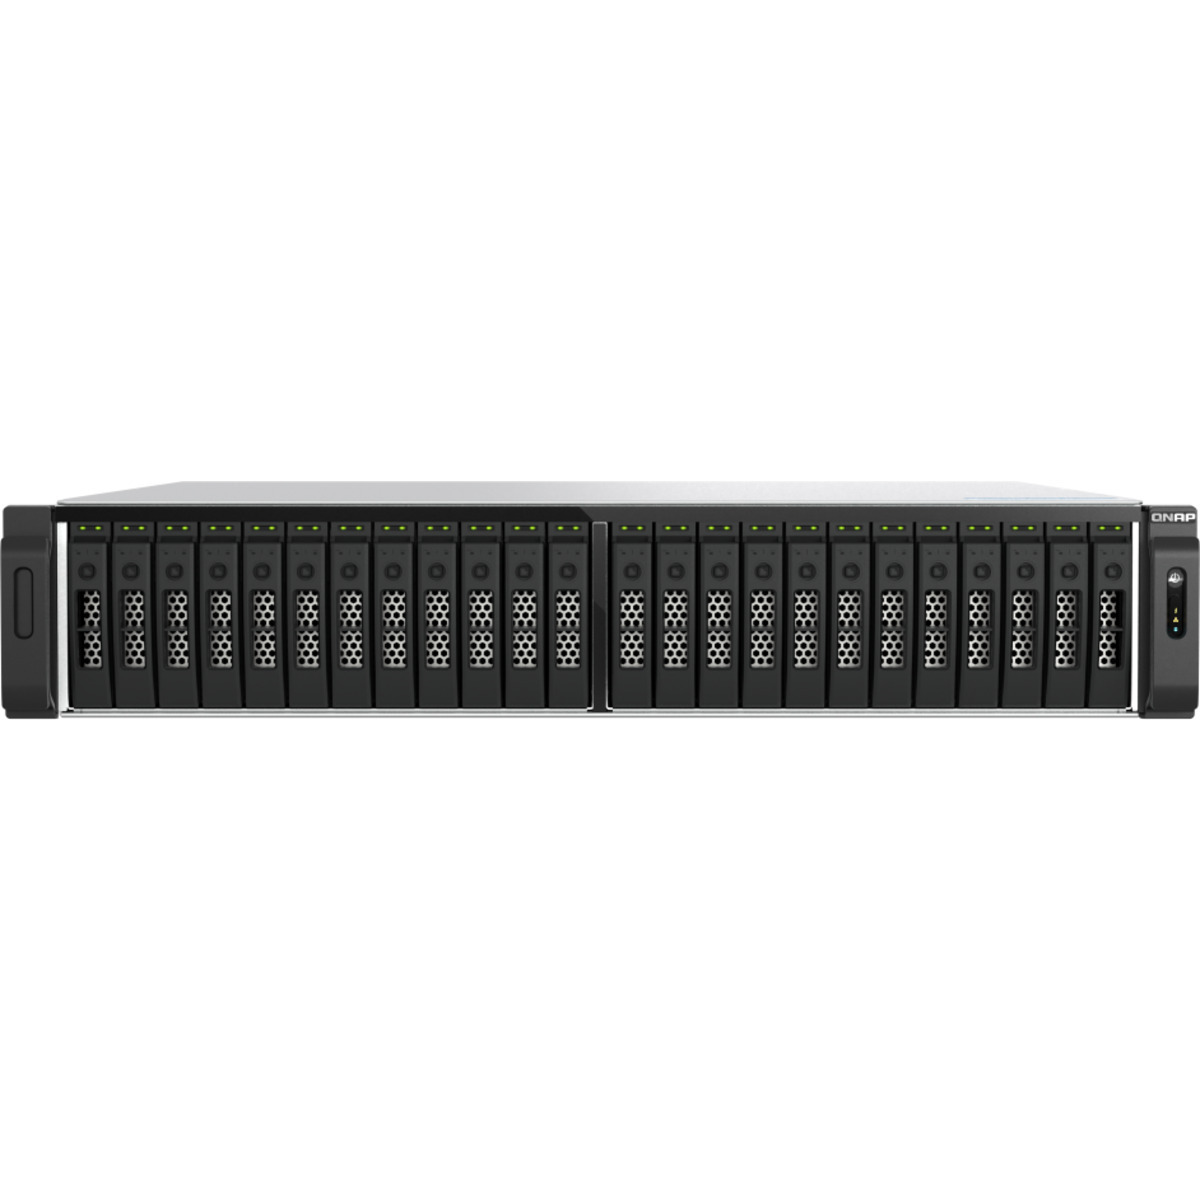 QNAP TS-h3077AFU Ryzen 5 All-Flash ZFS 100tb 30-Bay RackMount Large Business / Enterprise NAS - Network Attached Storage Device 25x4tb Crucial MX500 CT4000MX500SSD1 2.5 560/510MB/s SATA 6Gb/s SSD CONSUMER Class Drives Installed - Burn-In Tested TS-h3077AFU Ryzen 5 All-Flash ZFS